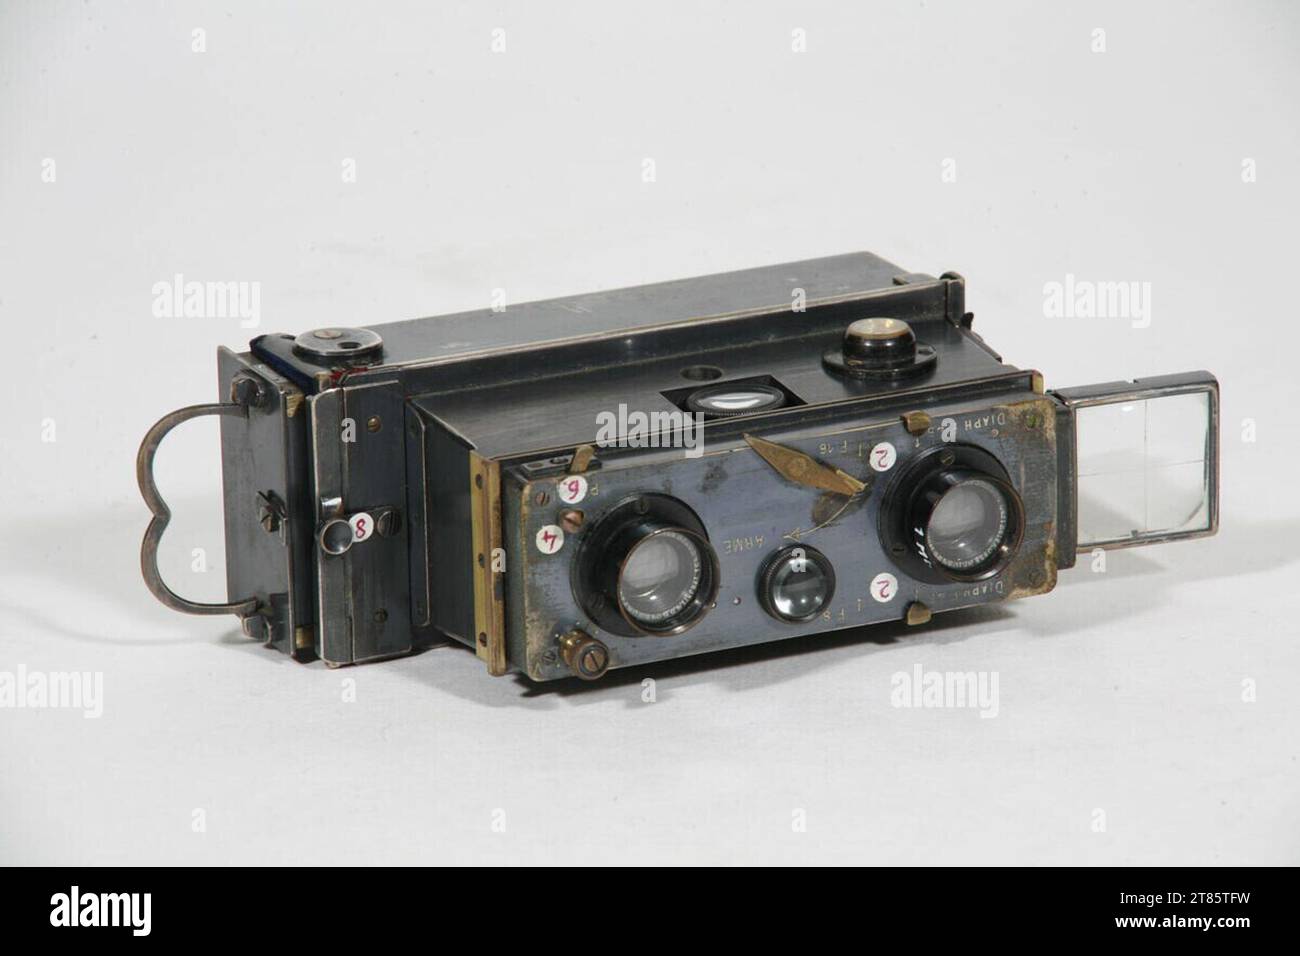 Jules Richard (Produzent in) Stereo camera 'Verascope'-45 x 107 mm, with two Zeiss Tessar lenses, No. 108496/491, f:/ 54 mm, sliding-blind F: 4.5, 16.8; Closure pneumatically continuously regulated by approx. 1/2 ' - 1/100'; Change magazine for 12 plates and film pack cassette. Metal around 1915 Stock Photo